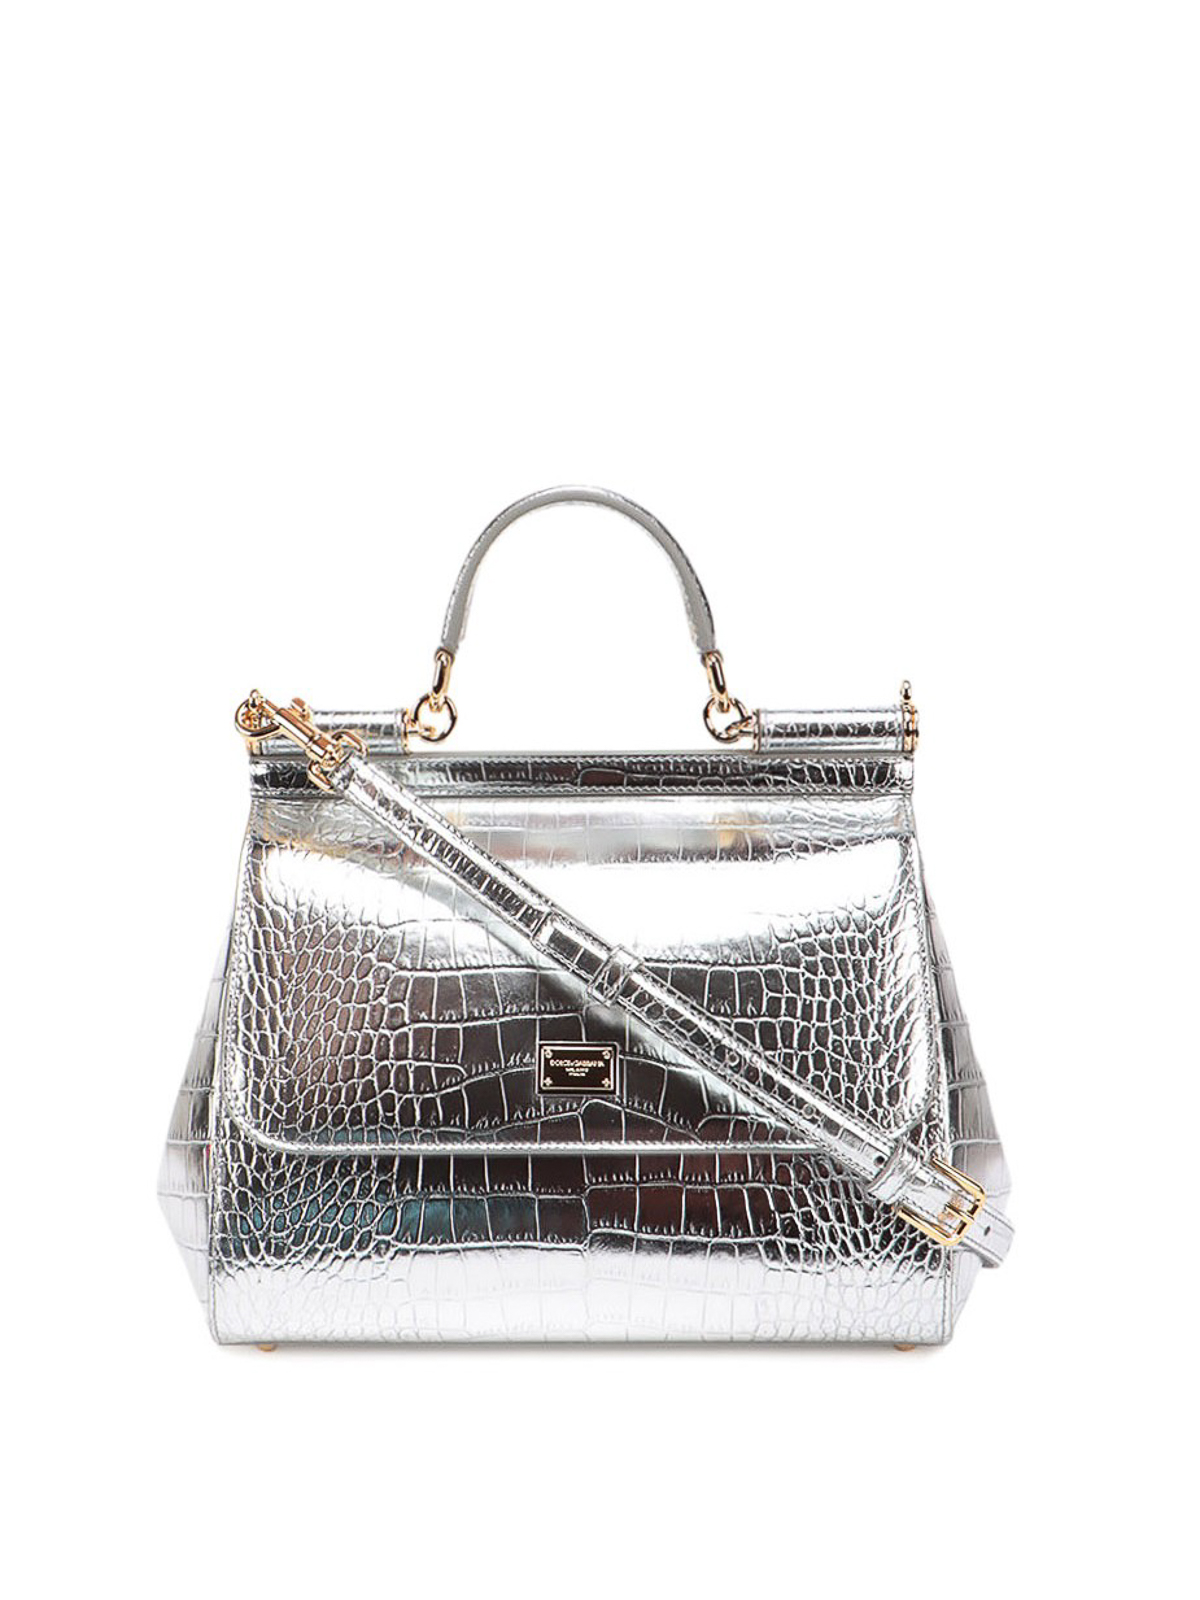 Dolce & Gabbana Silver Lizard Embossed Leather Small Miss Sicily